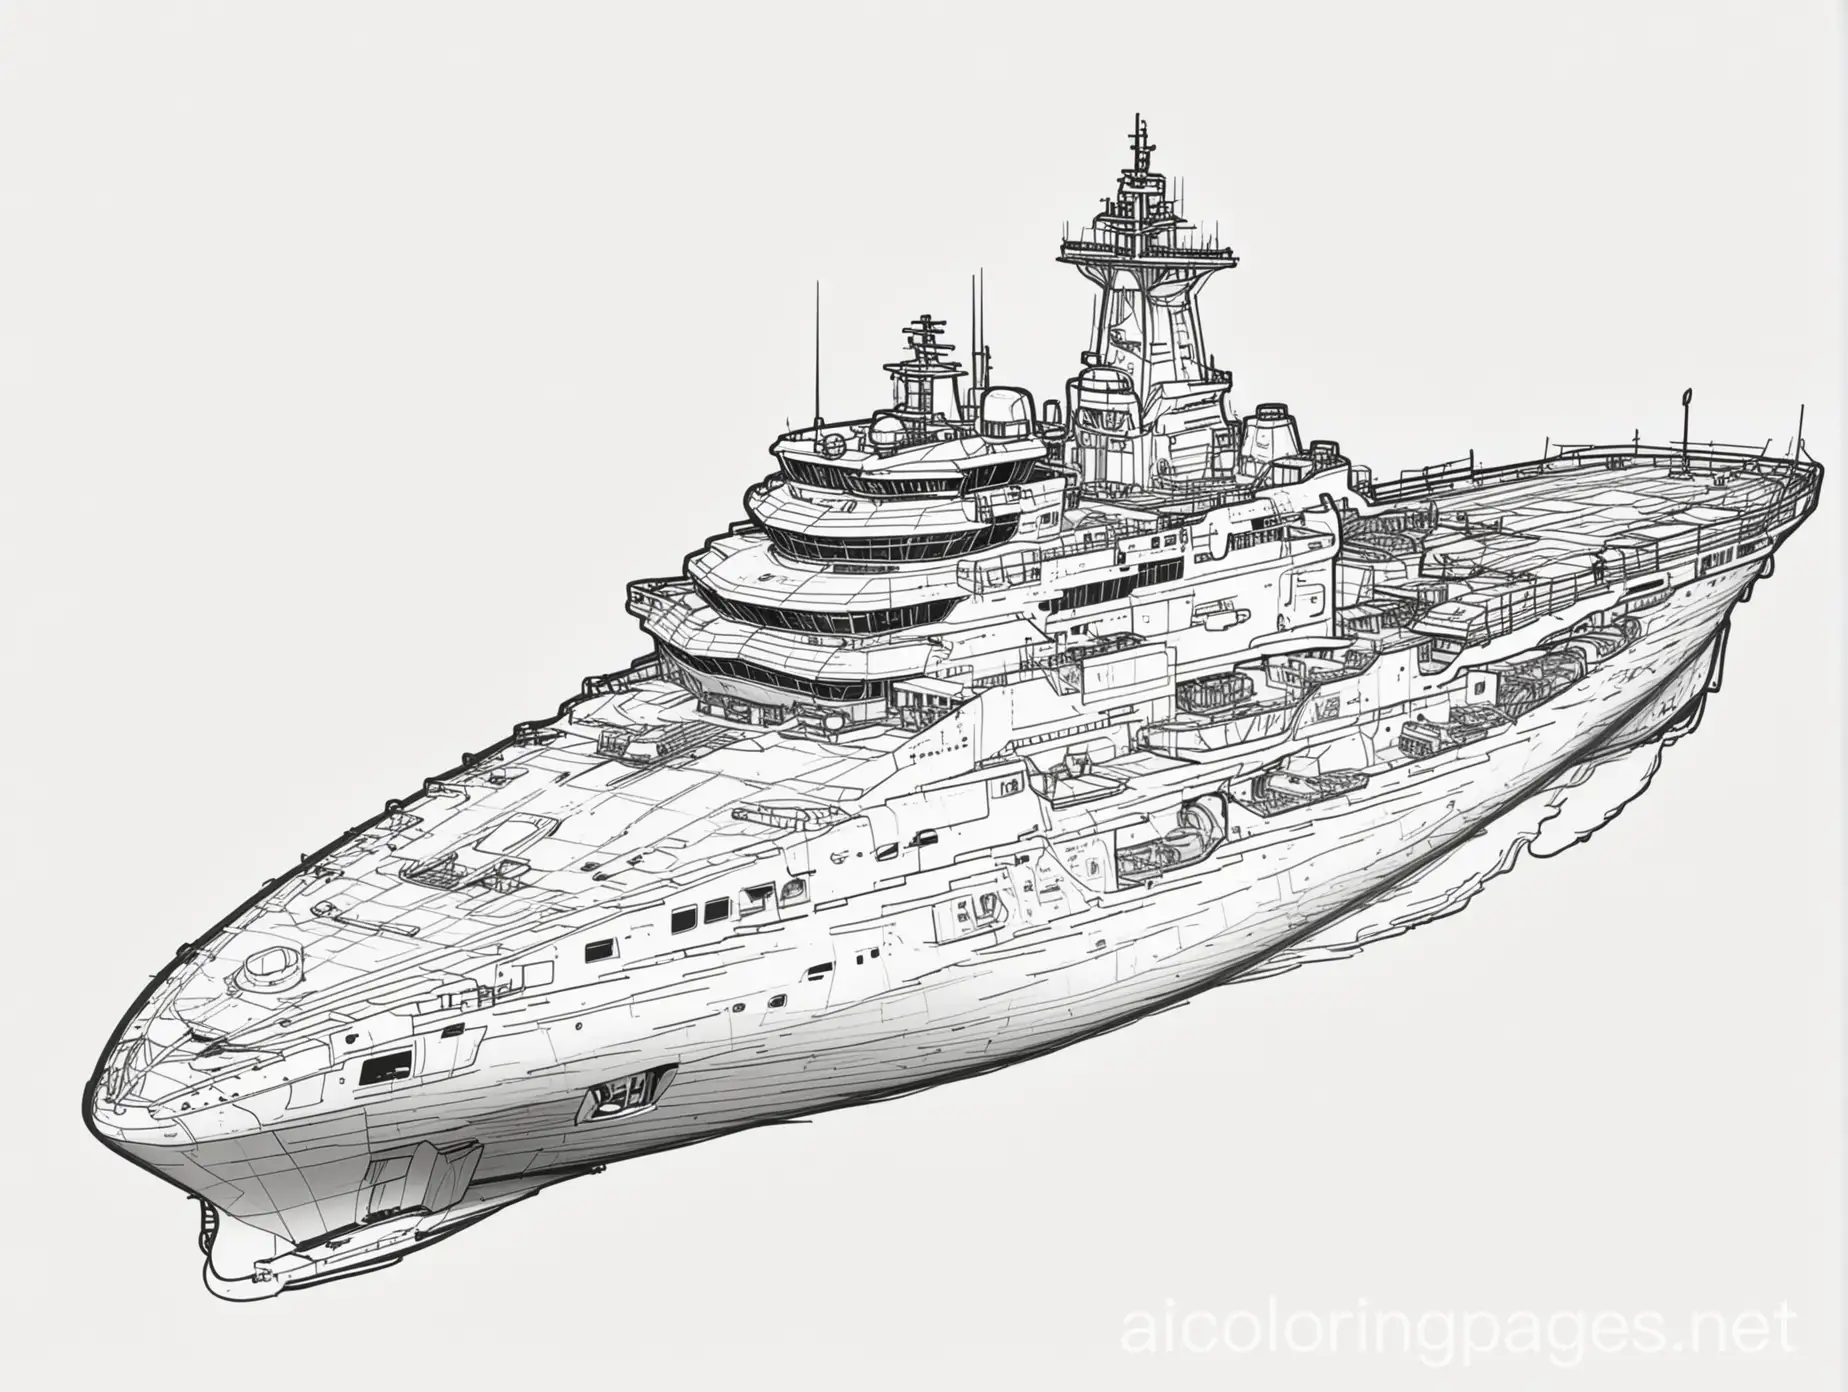 flight deck ship, Coloring Page, black and white, line art, white background, Simplicity, Ample White Space. The background of the coloring page is plain white to make it easy for young children to color within the lines. The outlines of all the subjects are easy to distinguish, making it simple for kids to color without too much difficulty